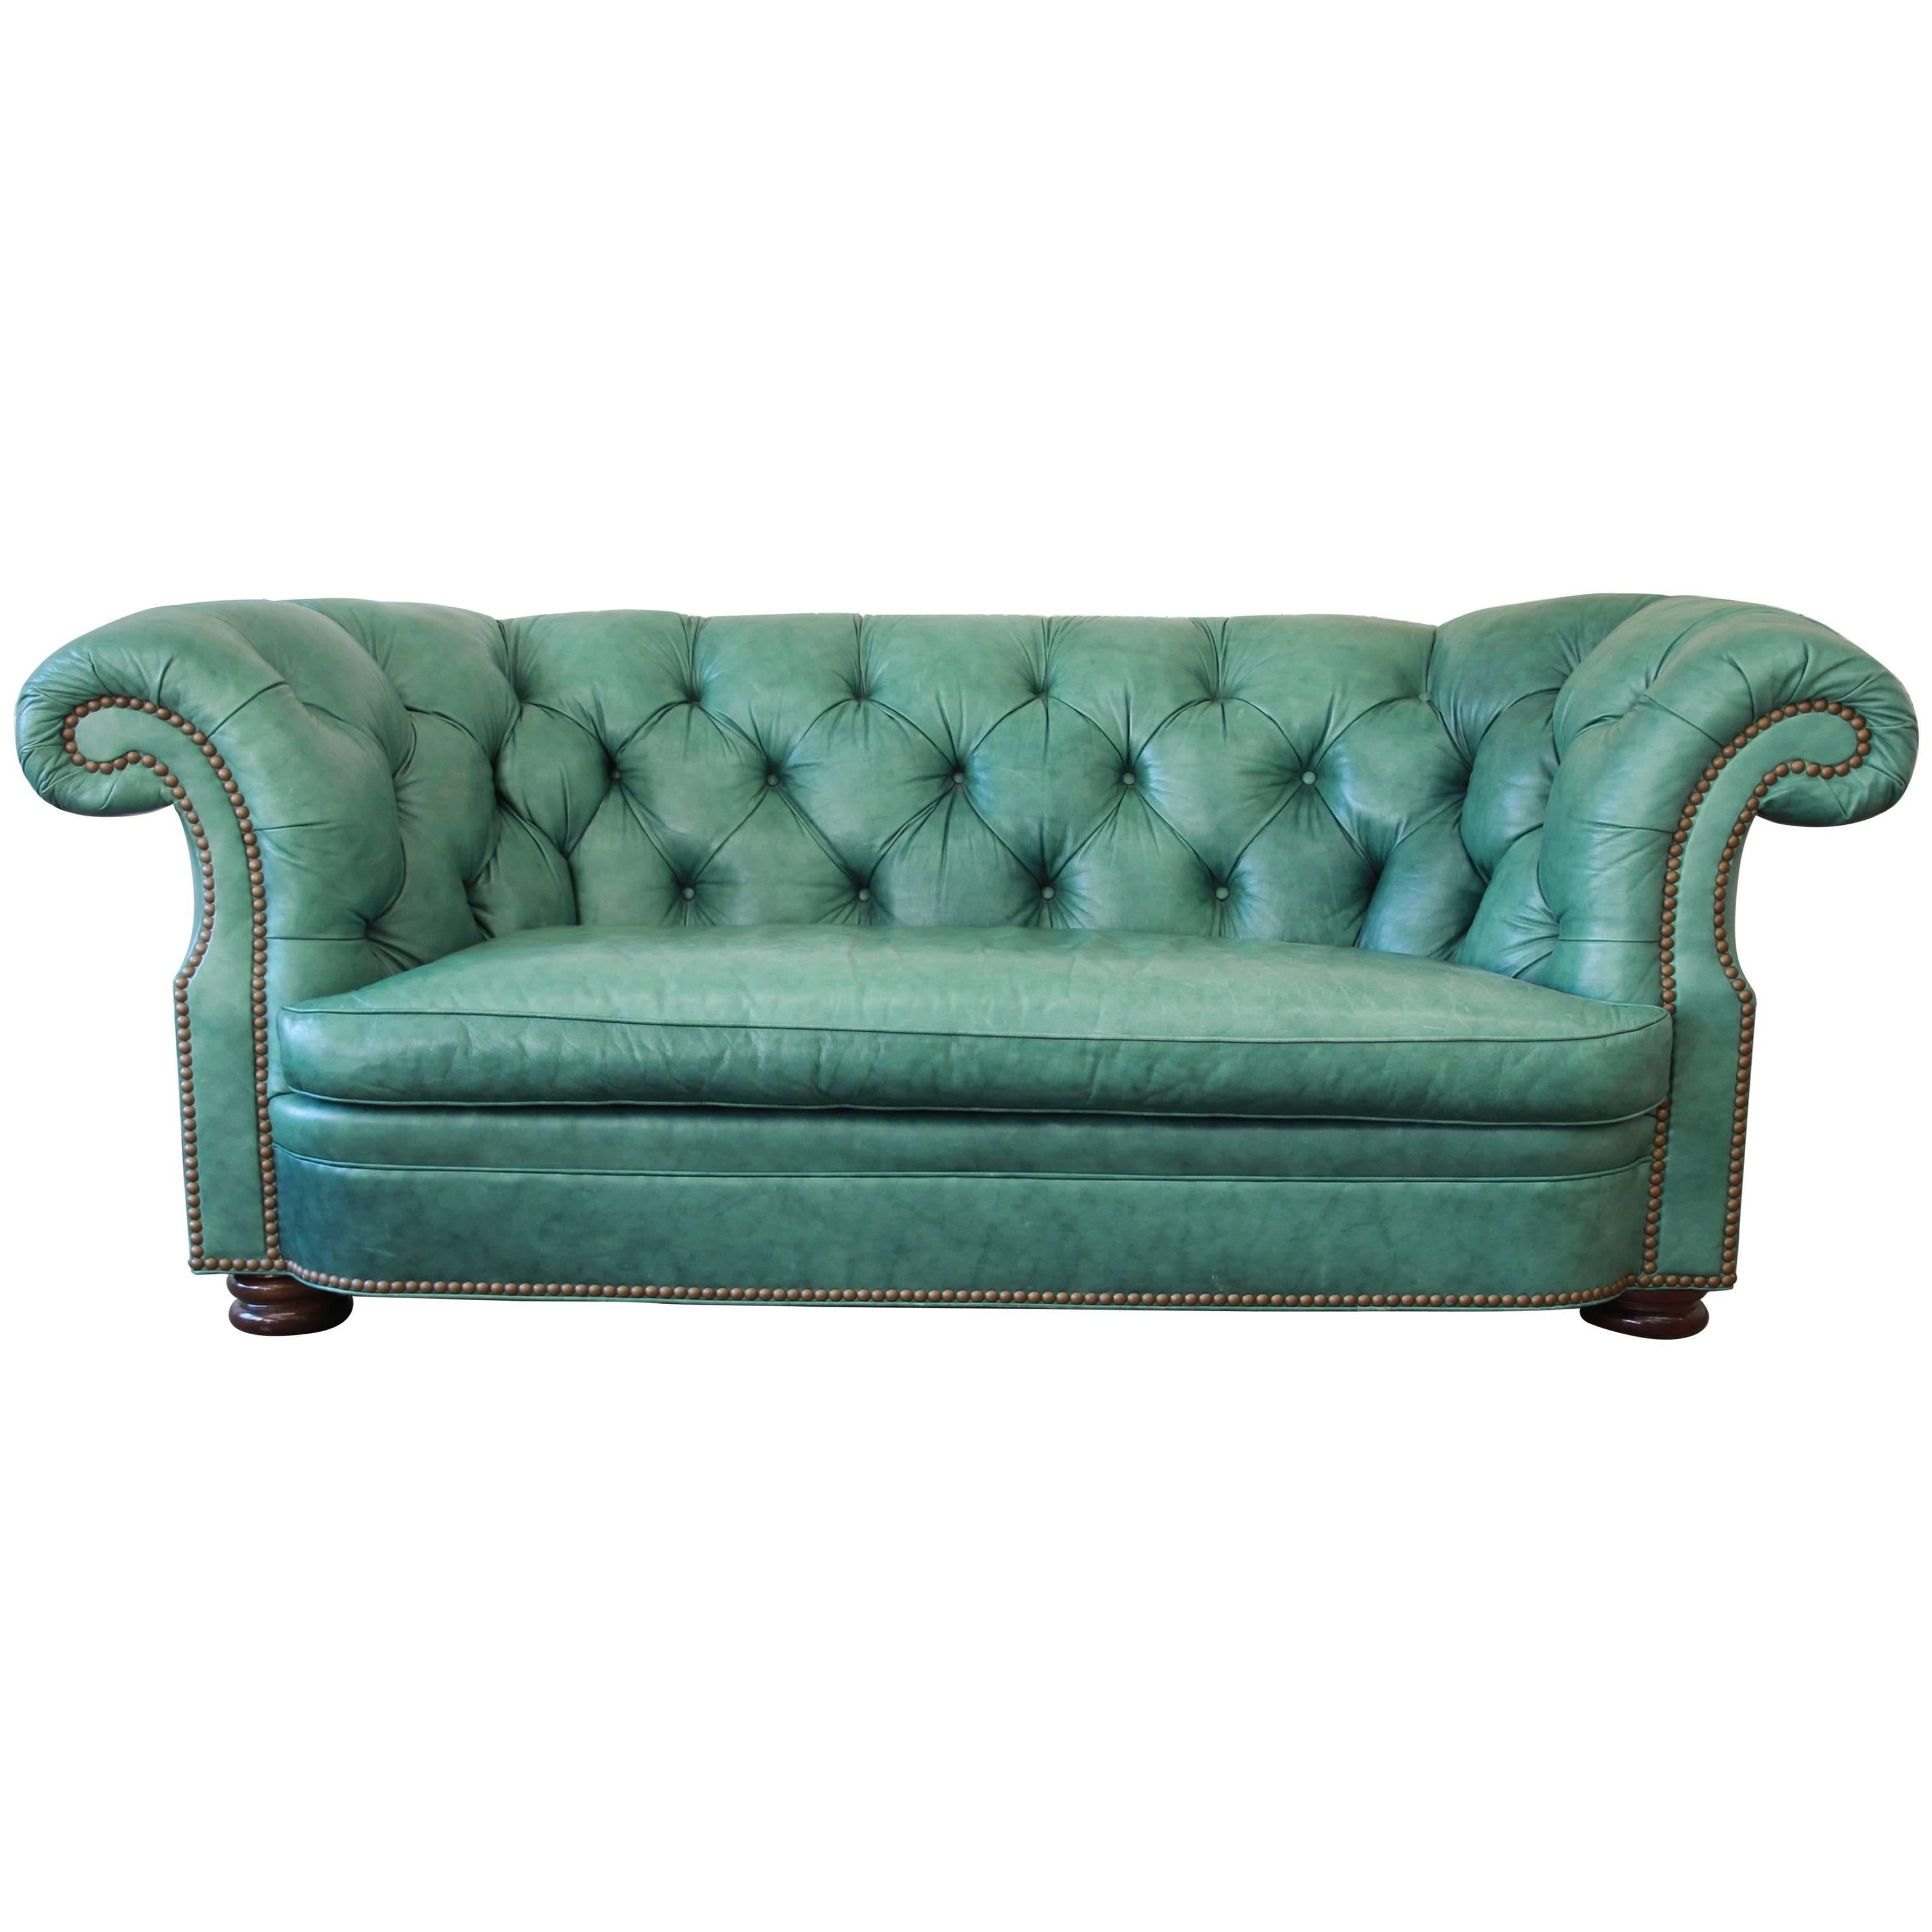 Vintage Teal Tufted Leather Chesterfield Sofa by Hancock & Moore